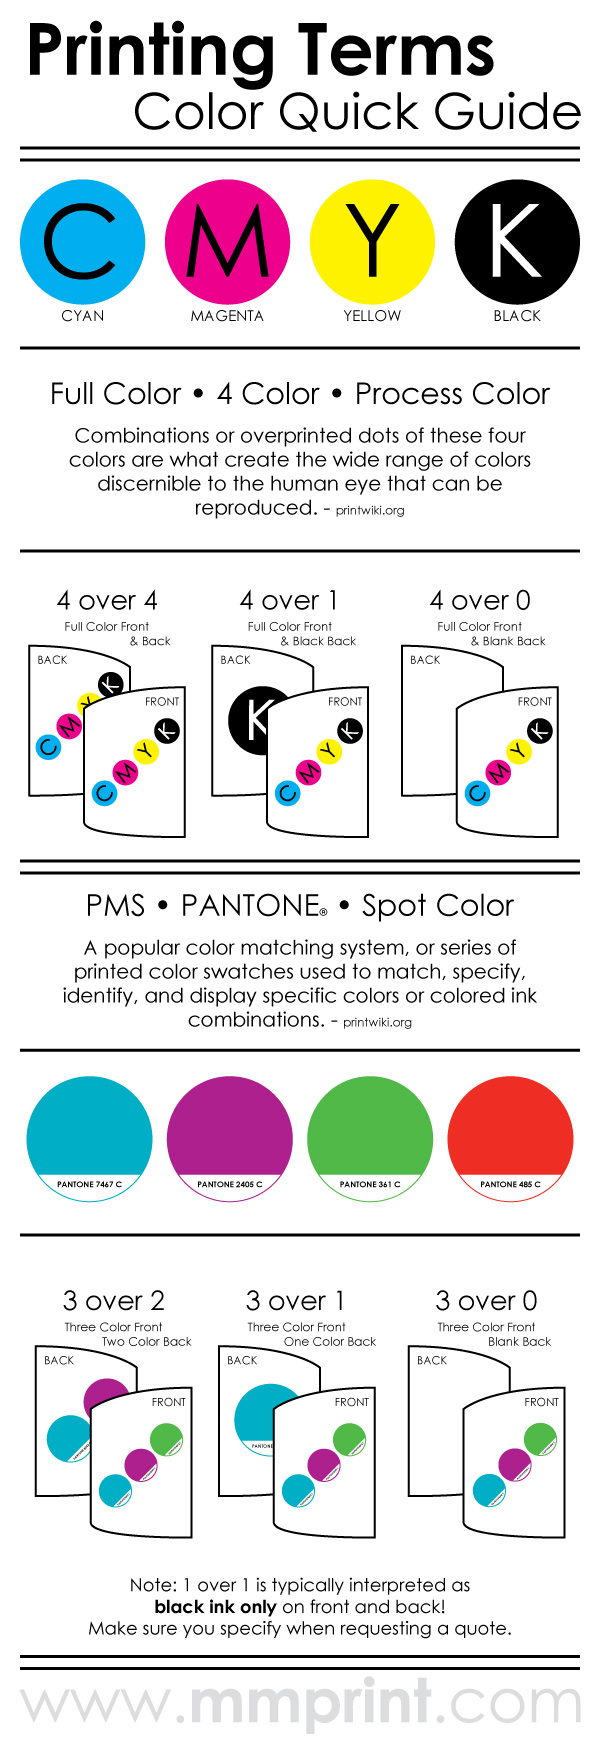 Printing Terms Color Quick Guide